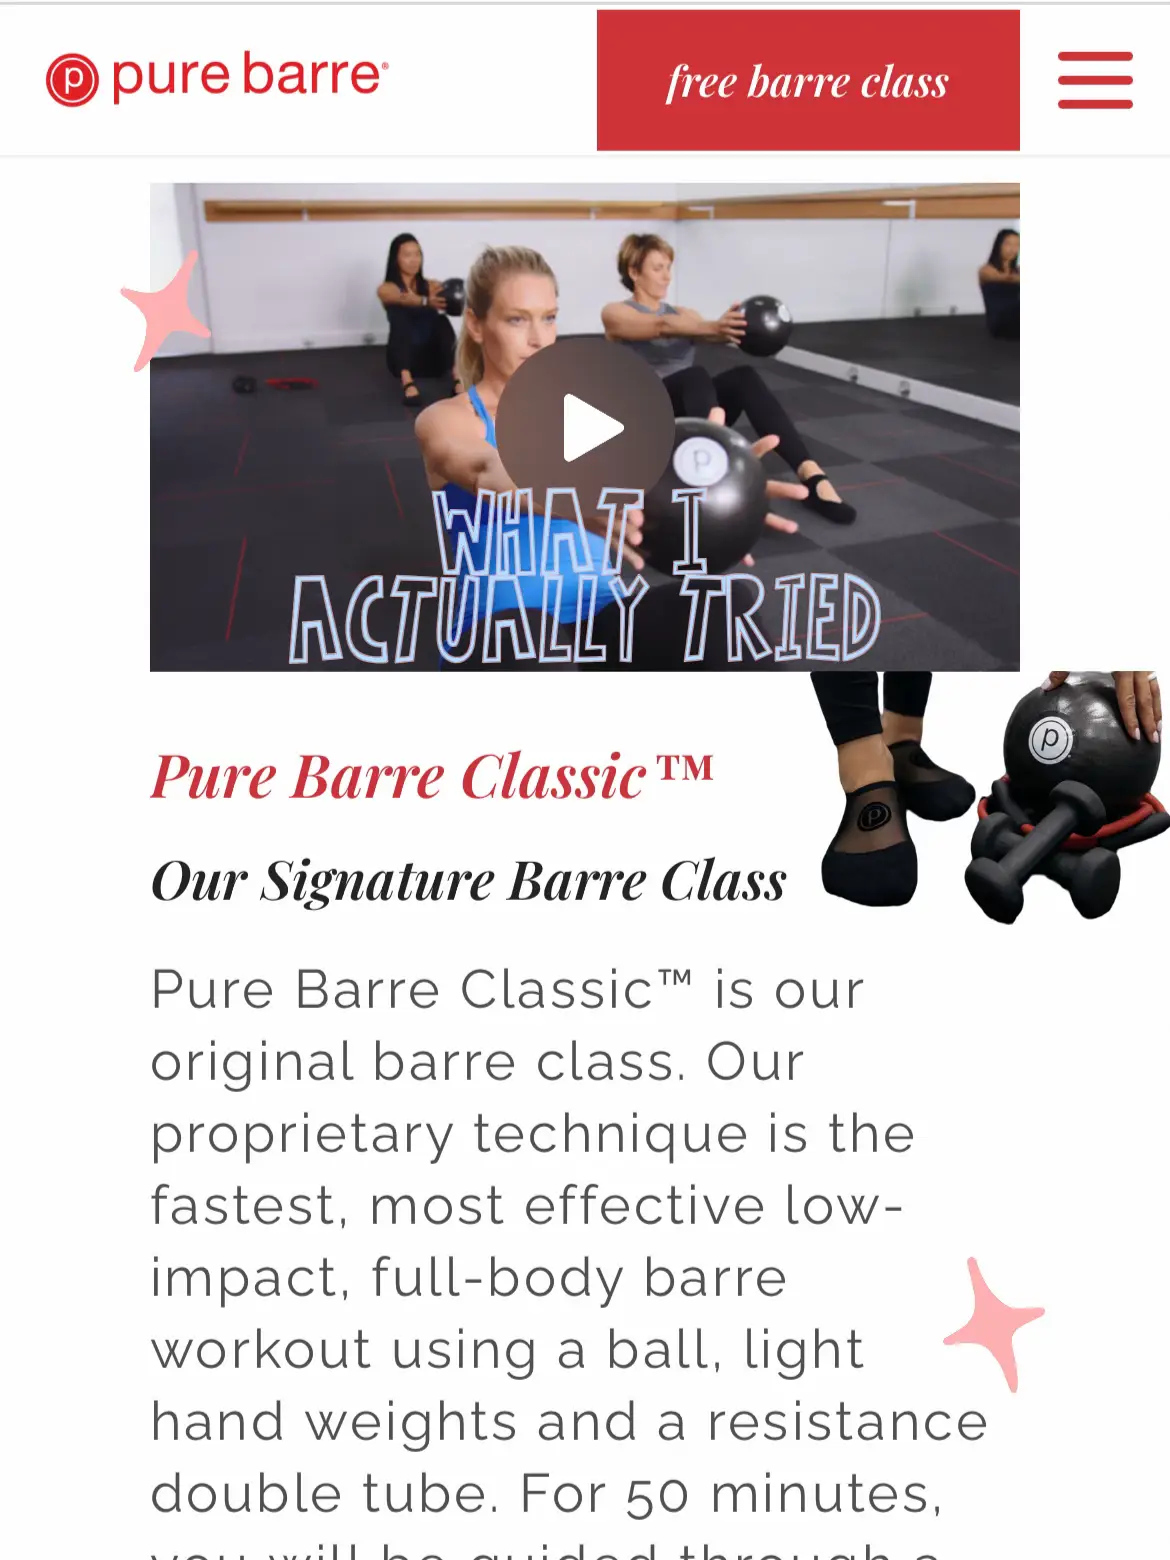 Benefits Of Barre Workout That Make It A Must-Try In 2023 - BetterMe